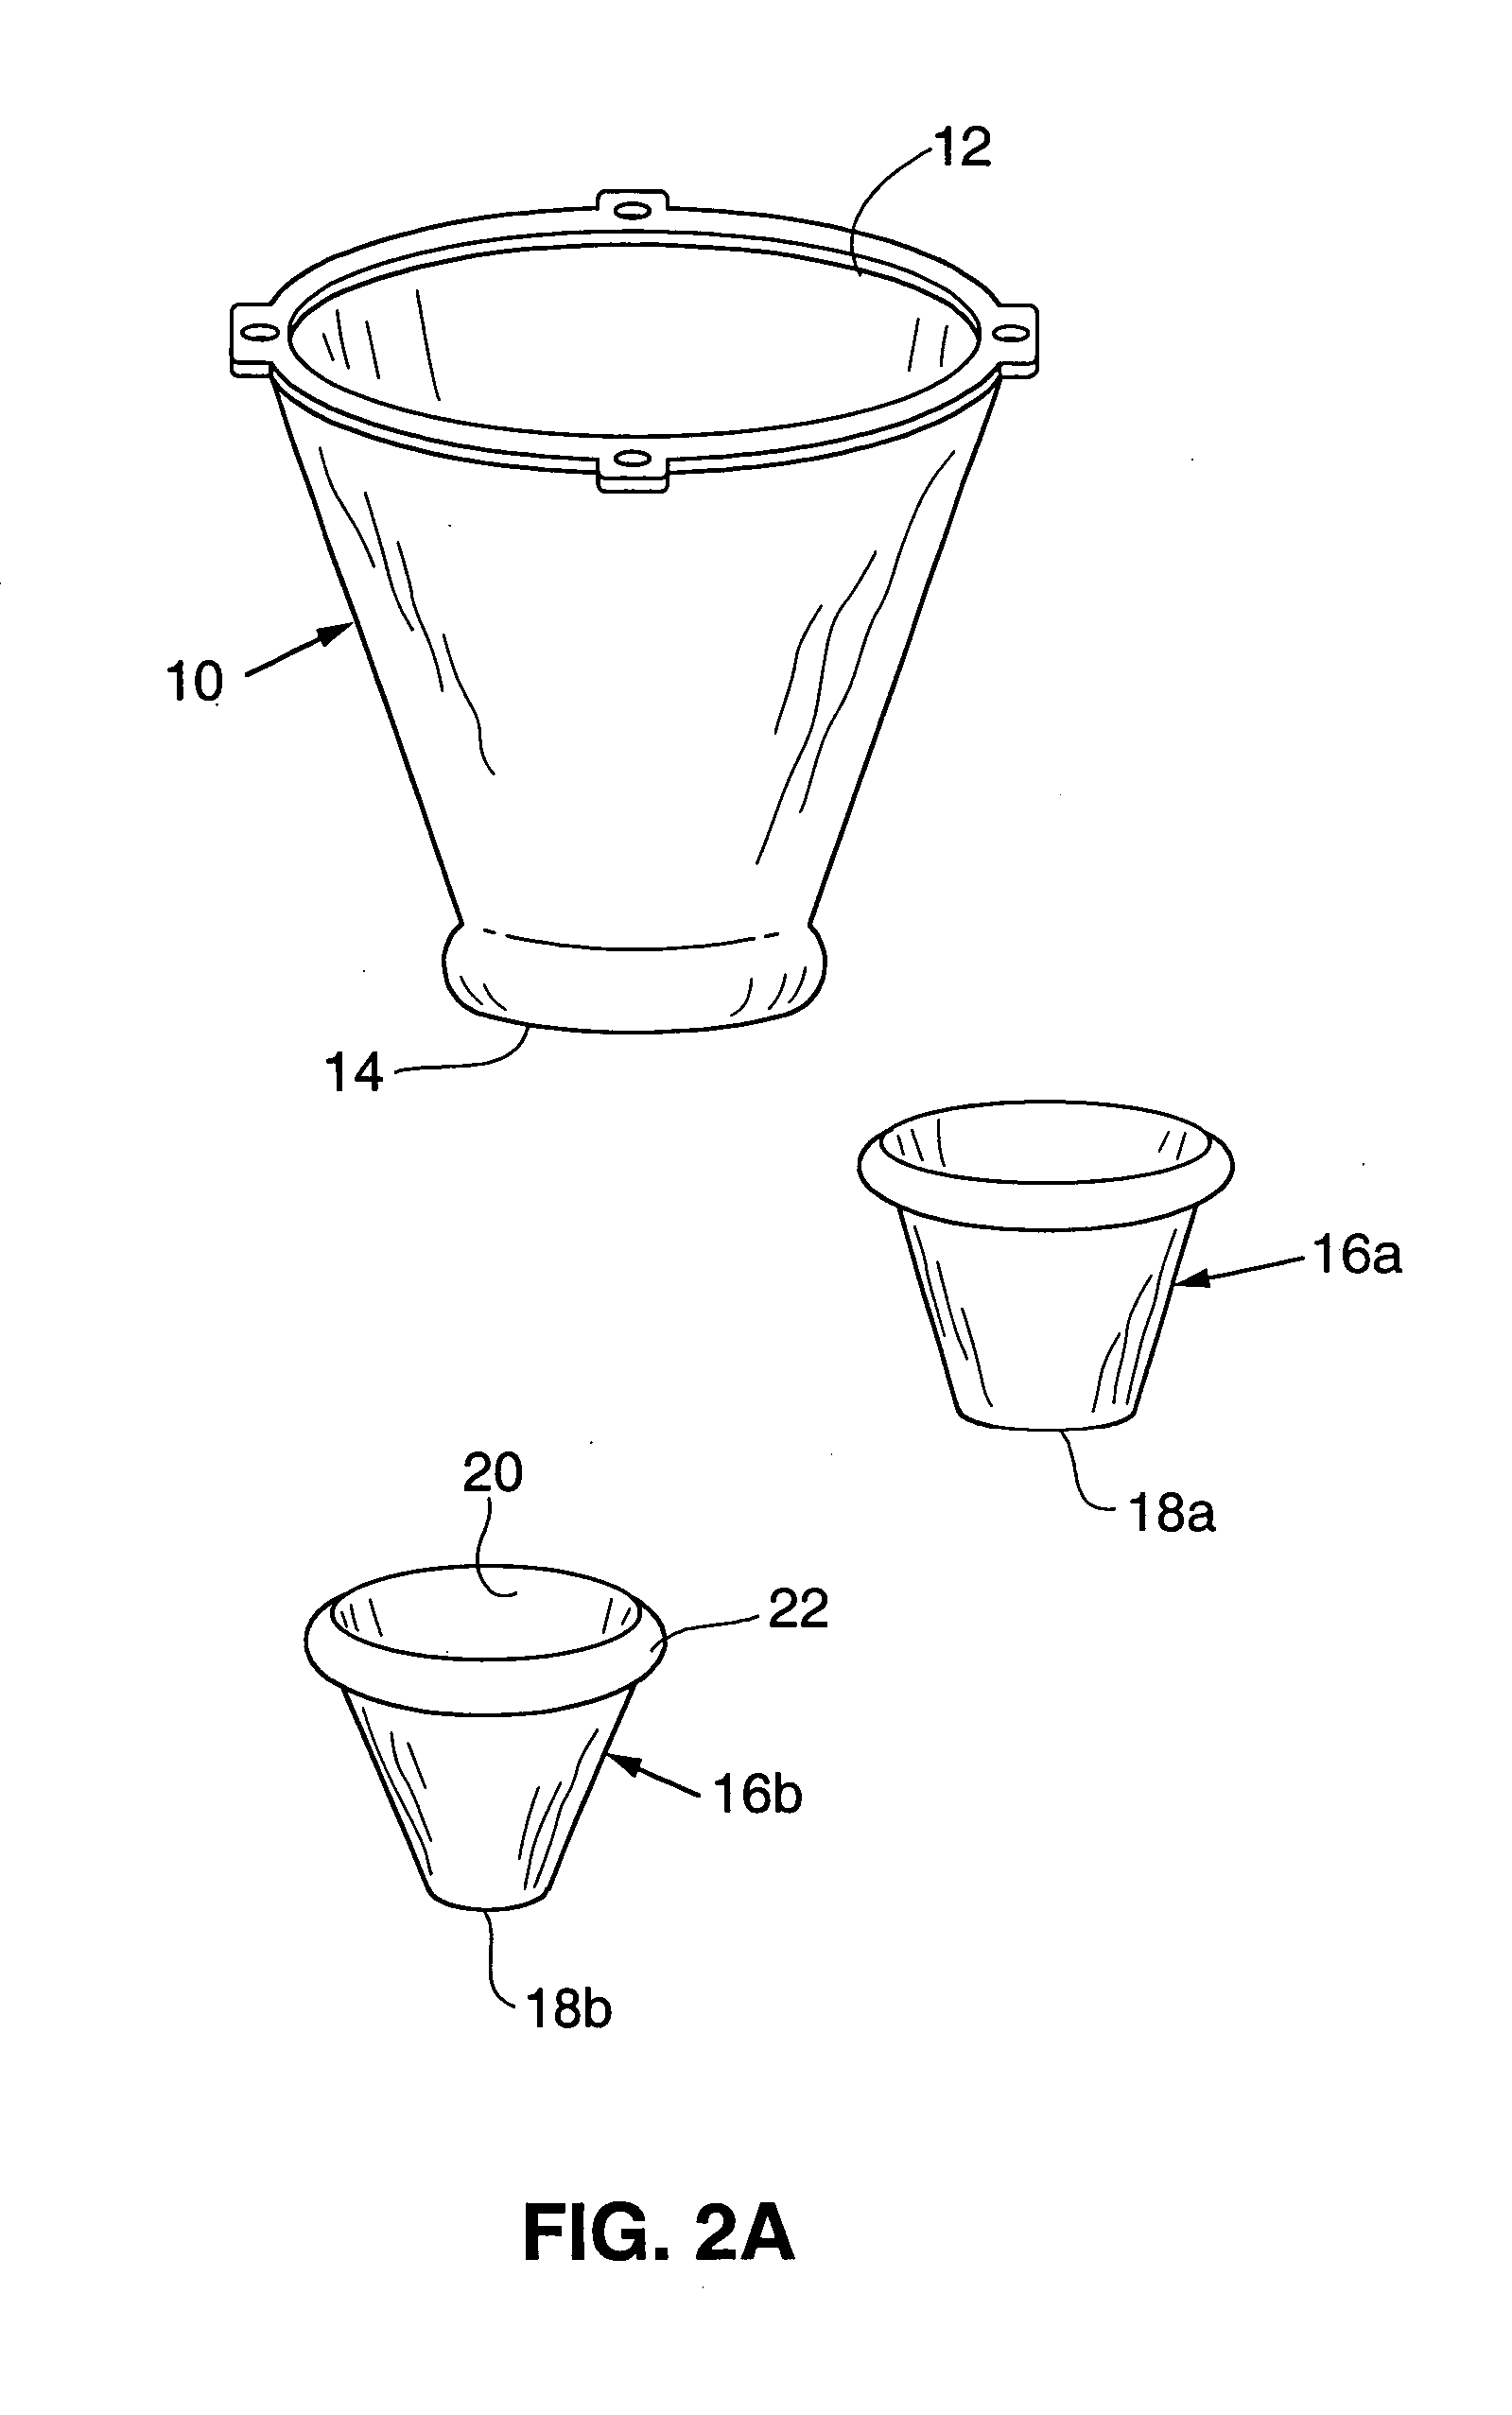 Method and apparatus for modifying the exit orifice of a satiation pouch